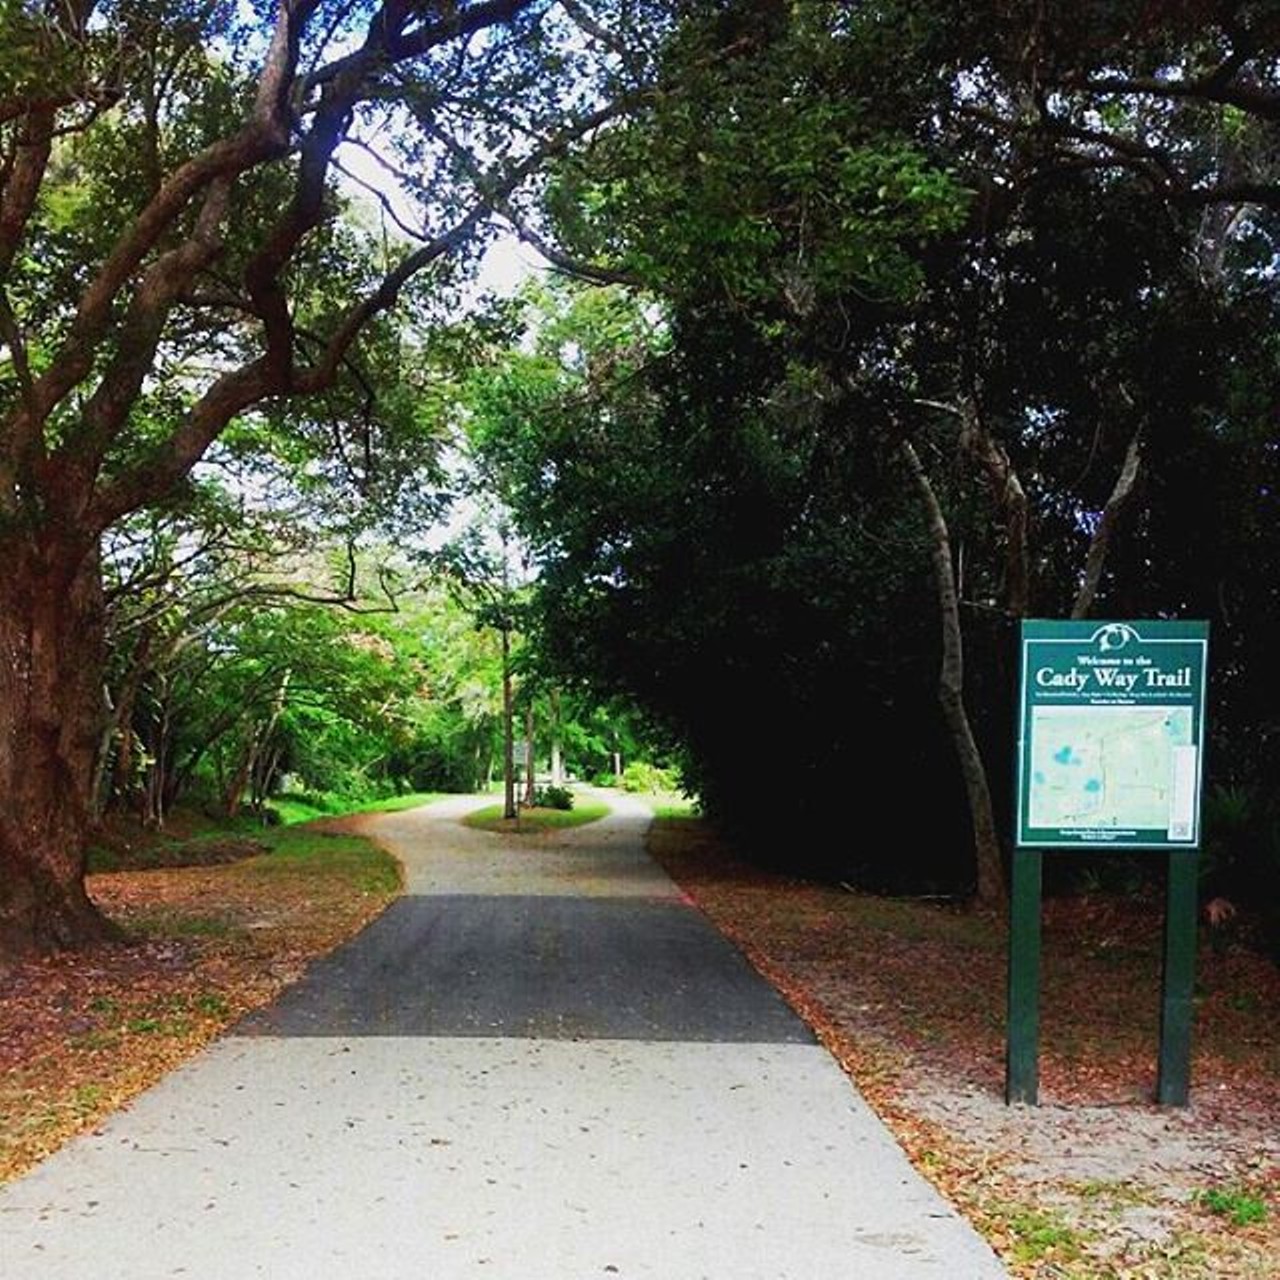 Go for a bike ride on the Cady Way Trail
In cooler weather, riding bikes isn't such a sweaty endeavor. This 6.5-mile pathway is easy enough for even the most novice of pedalers. Plus, if you park at the Fashion Square Mall, you can end your trek with a little dinner and a movie maneuver   
Pic via